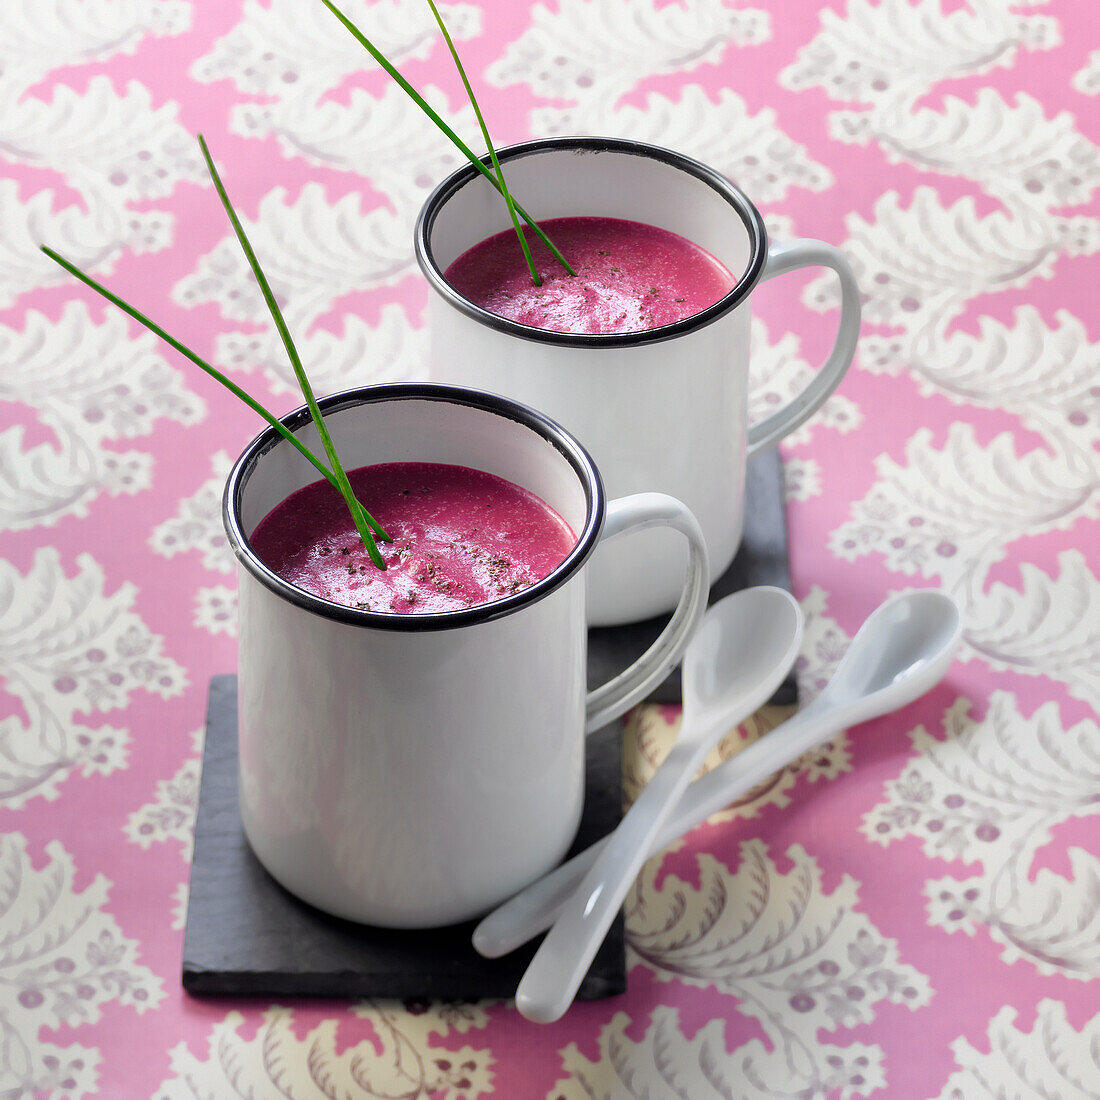 Chilled red beetroot soup